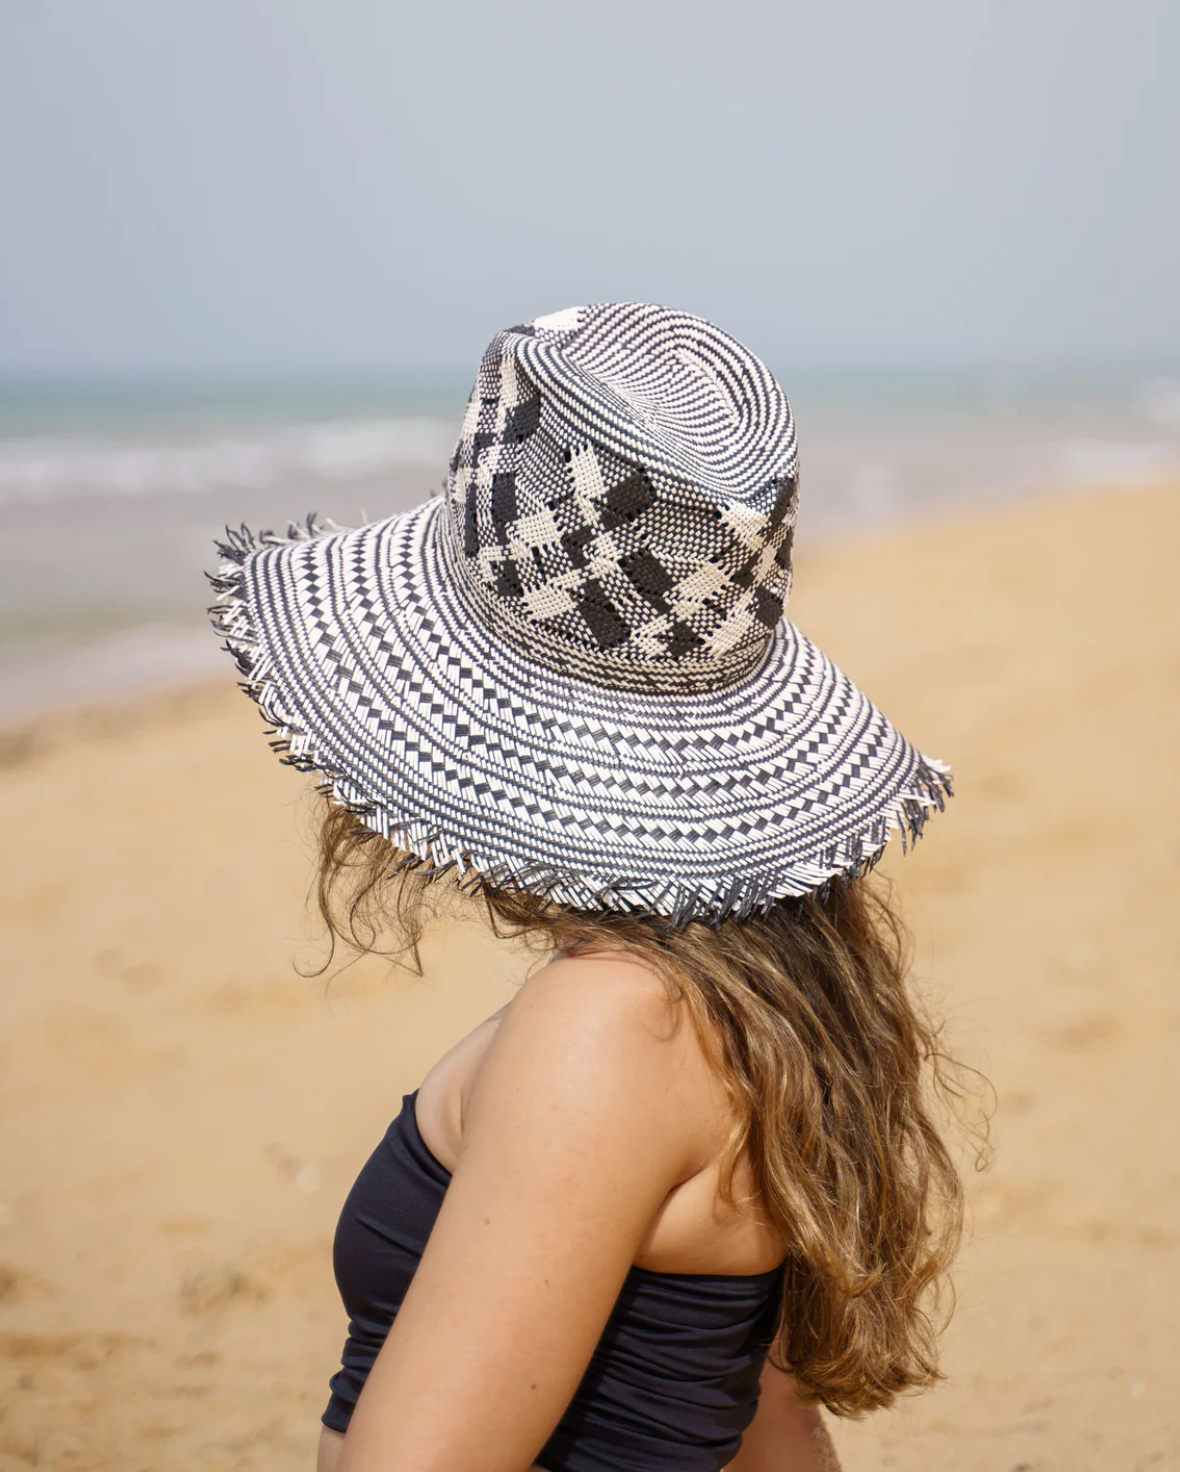 Discover Le Hat luxury accessories on Collagerie. Easy to pack on holiday and easy to store at home. Handcrafted straw hats for women. Fast UK Delivery & Free Returns | Collagerie.com